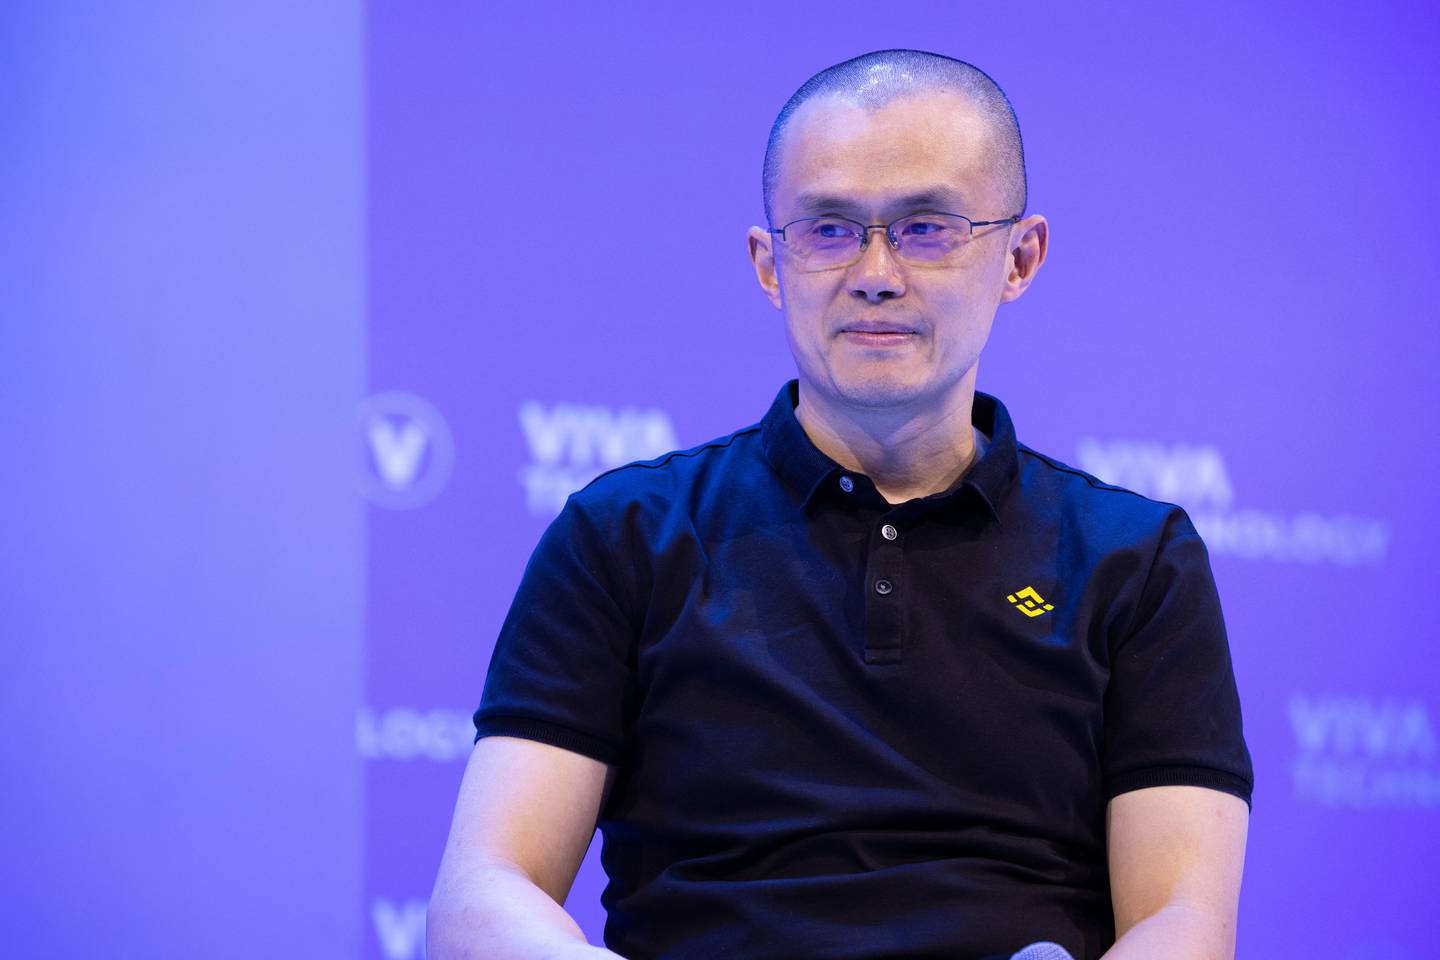 Mandatory Credit: Photo by Lafargue Raphael/ABACA/Shutterstock (13050148bf)
Binance CEO Changpeng Zhao aka CZ speaks on stage at the Vivatech technology startups and innovation fair in Paris on May 16, 2022.
Second day of the Vivatech 2022 Fair - Paris, France - 16 Jun 2022